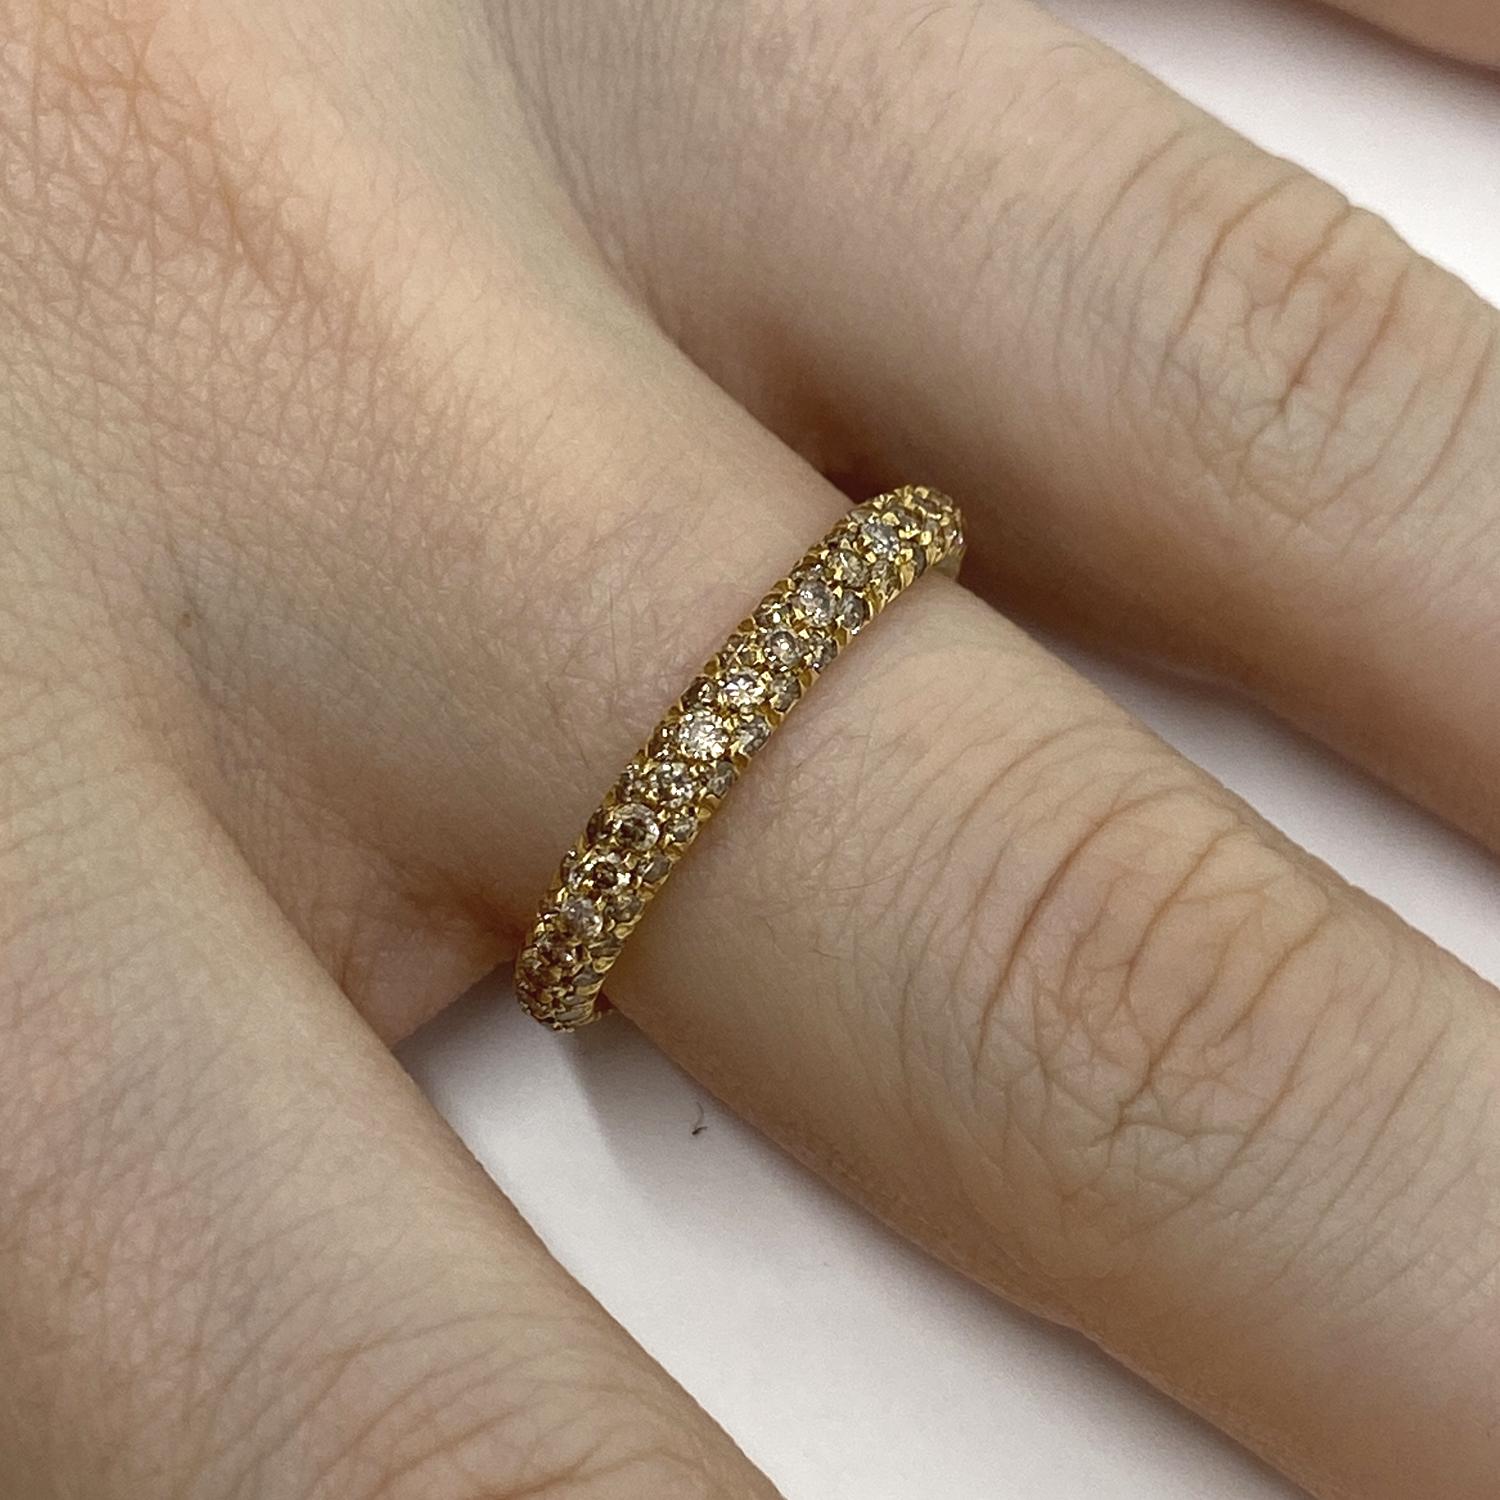 Ring made of 18kt yellow gold with natural brown brilliant-cut diamonds for ct.1.31 

Welcome to our jewelry collection, where every piece tells a story of timeless elegance and unparalleled craftsmanship. As a family-run business in Italy for over